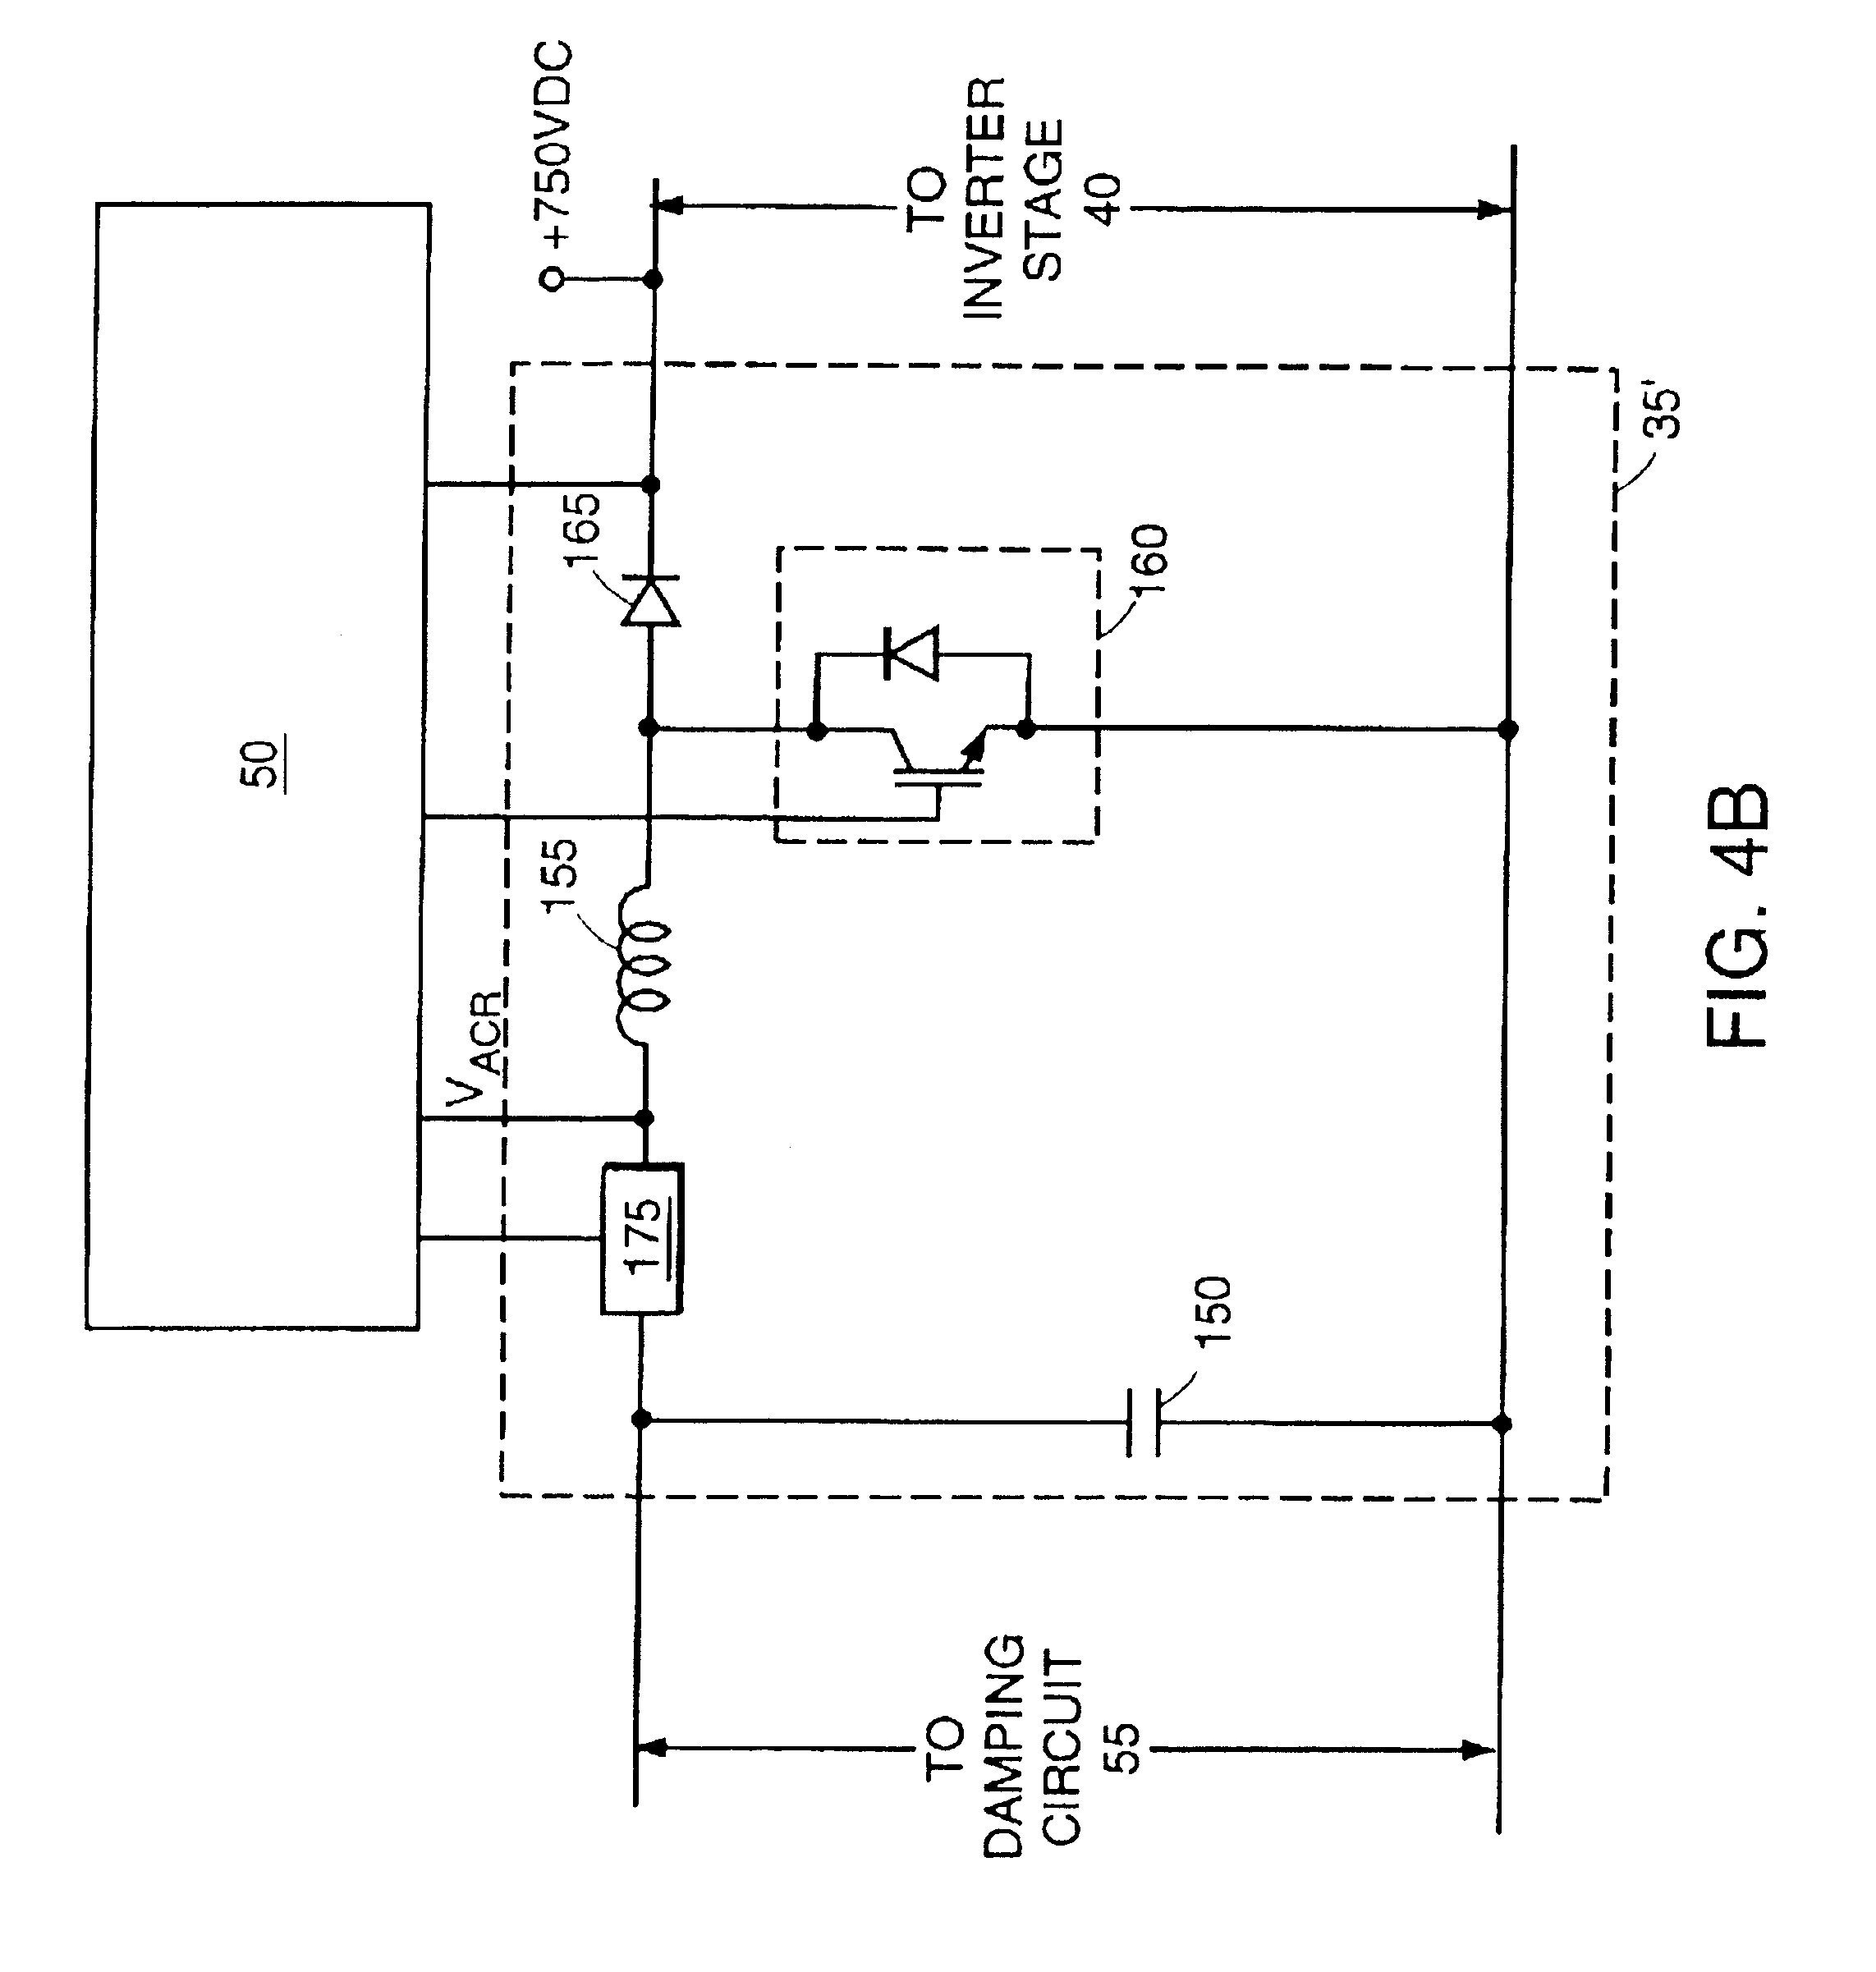 Patent Us Dsp Based Plasma Cutting System Google Patents Drawing bridge rectifier schematic